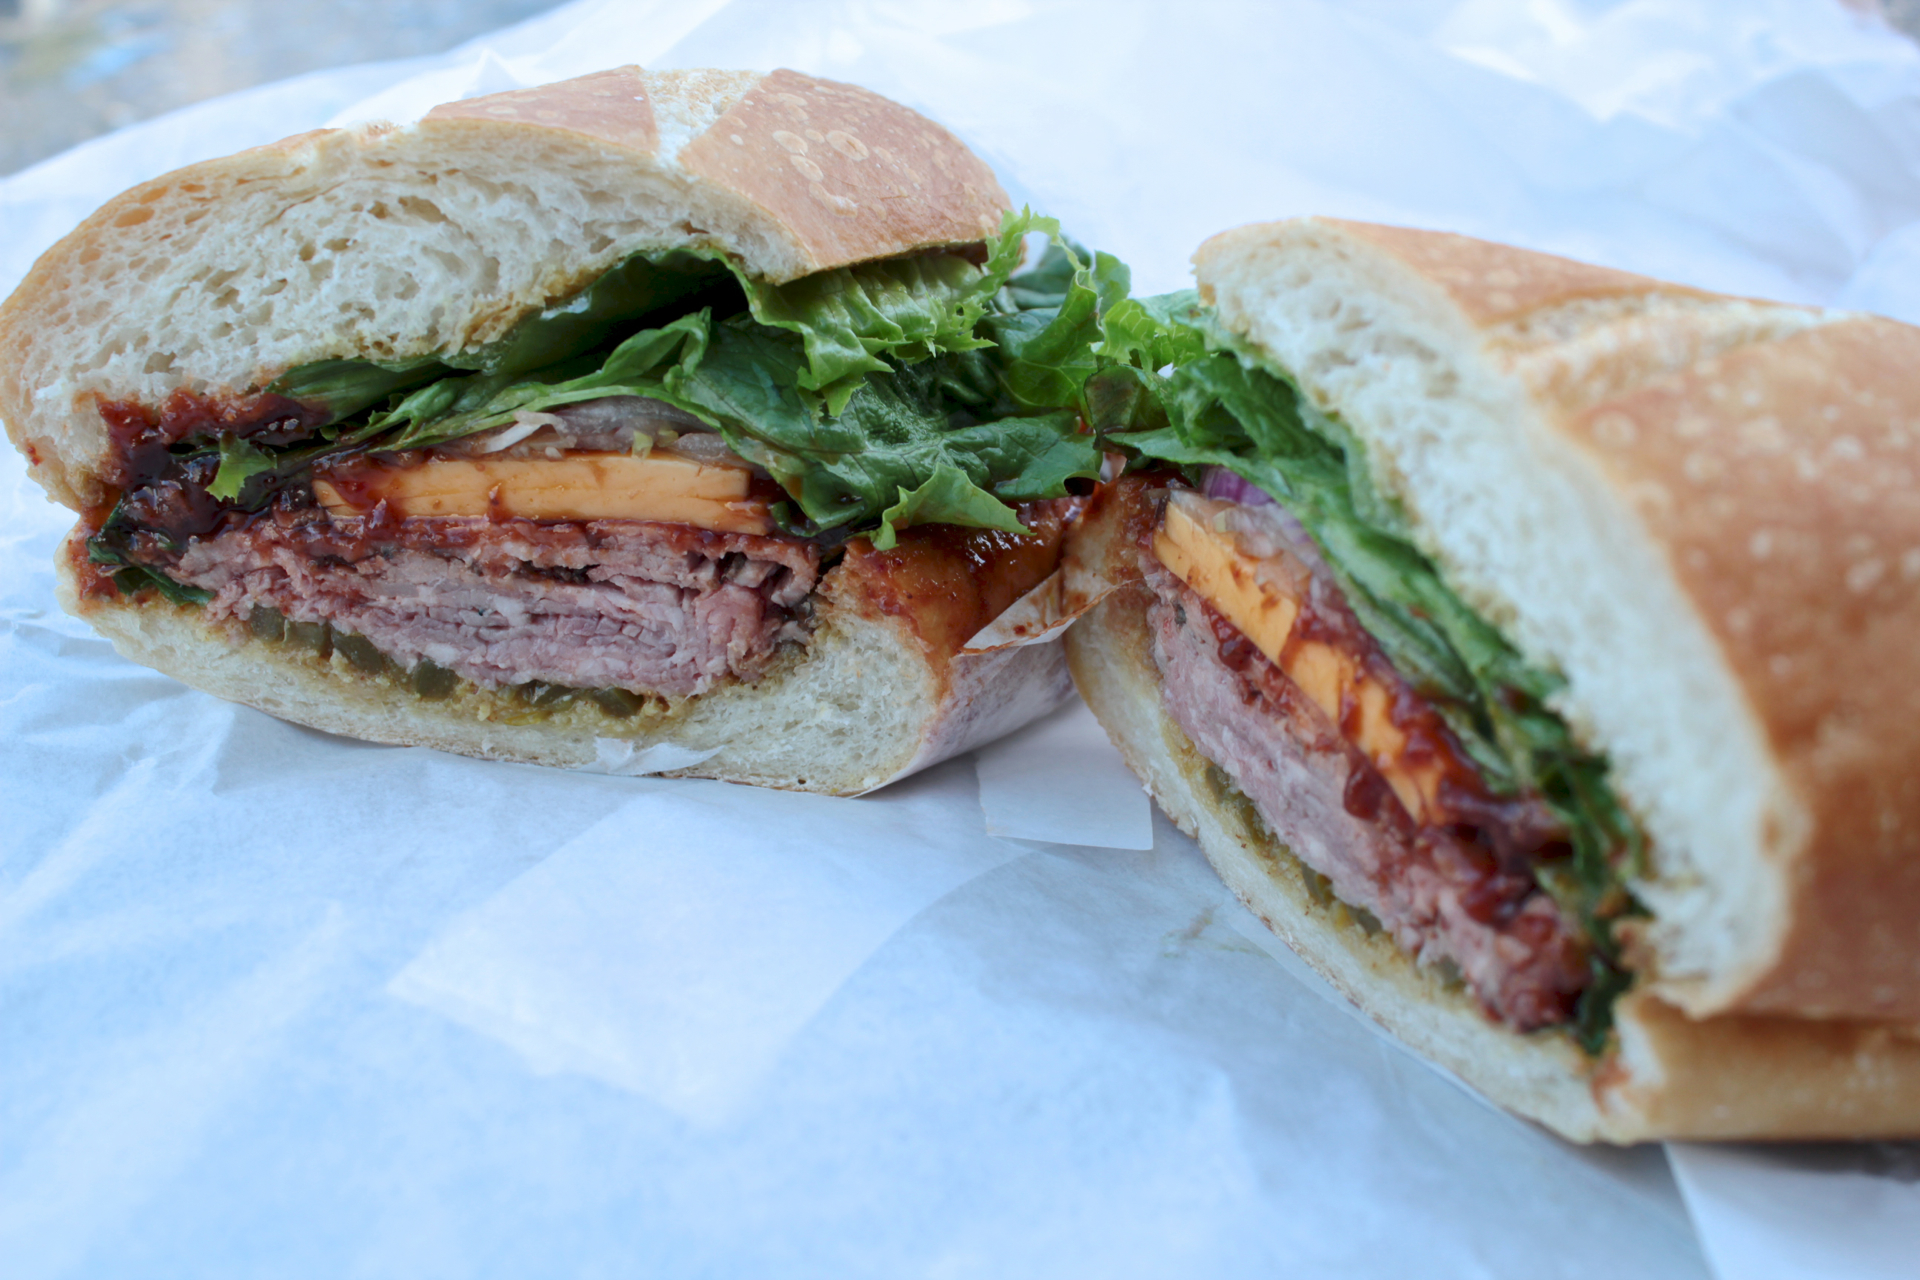 The Slow Burn sandwich features Tri-Tip with chipotle sauce, honey mustard and peppers.